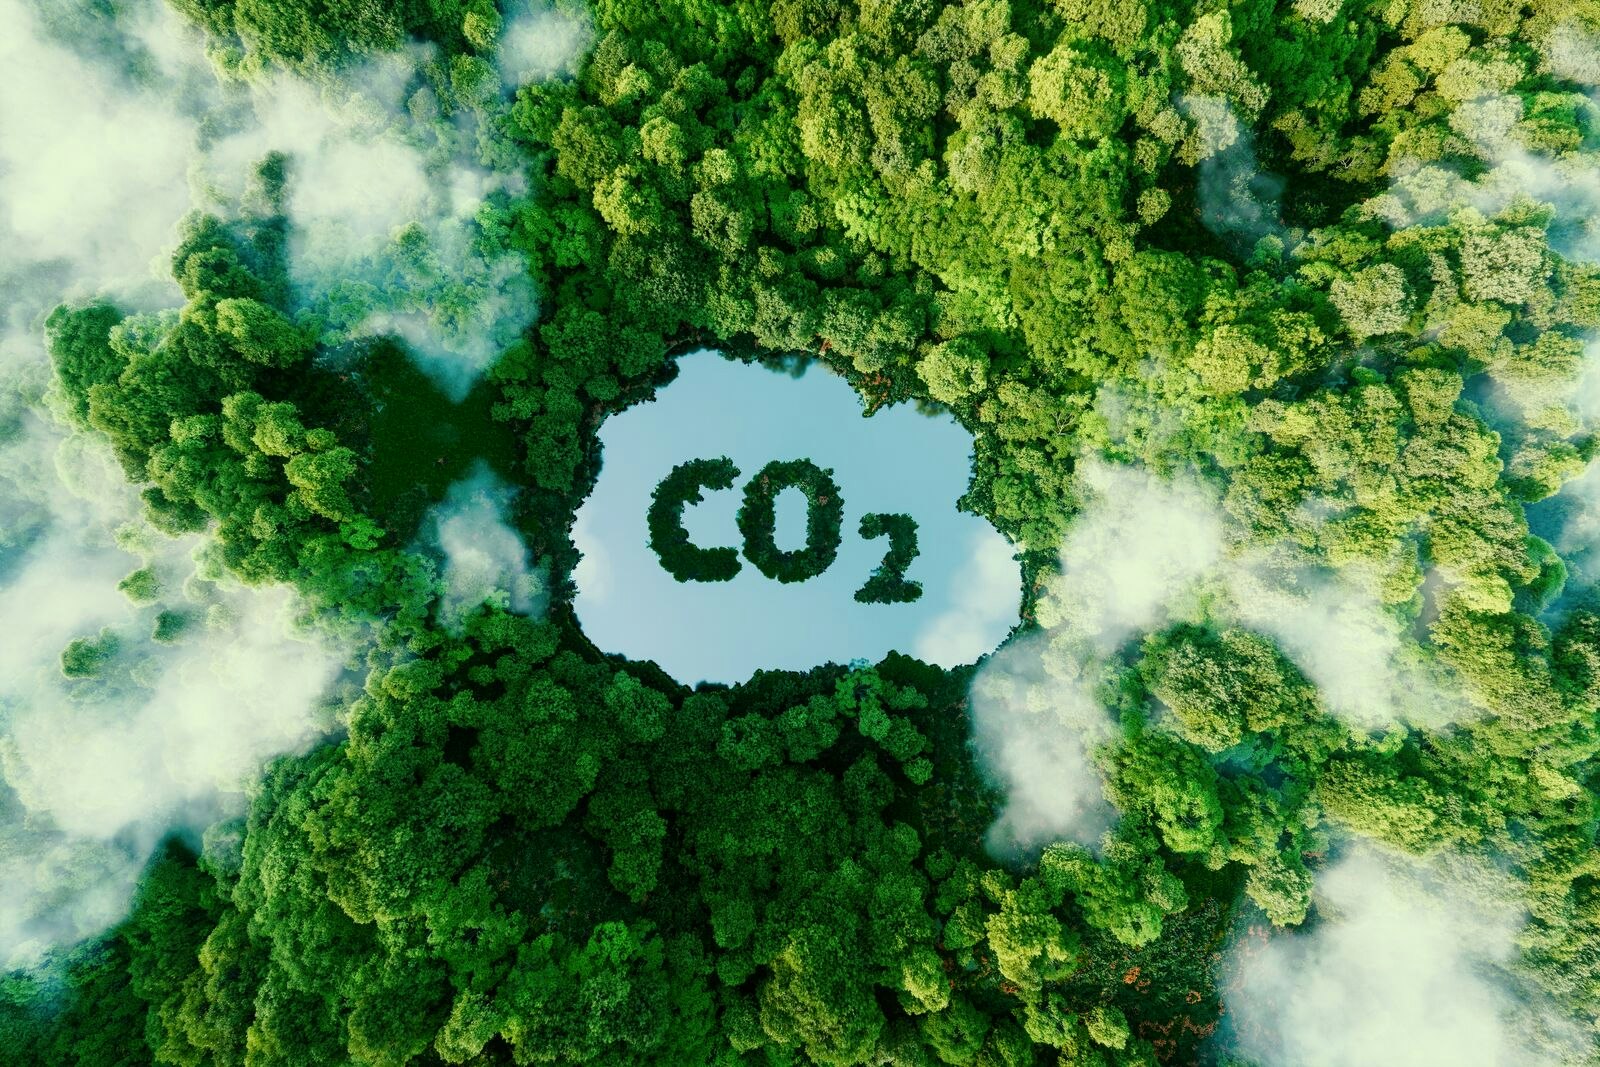 Carbon Dioxide Emissions Issue Concept